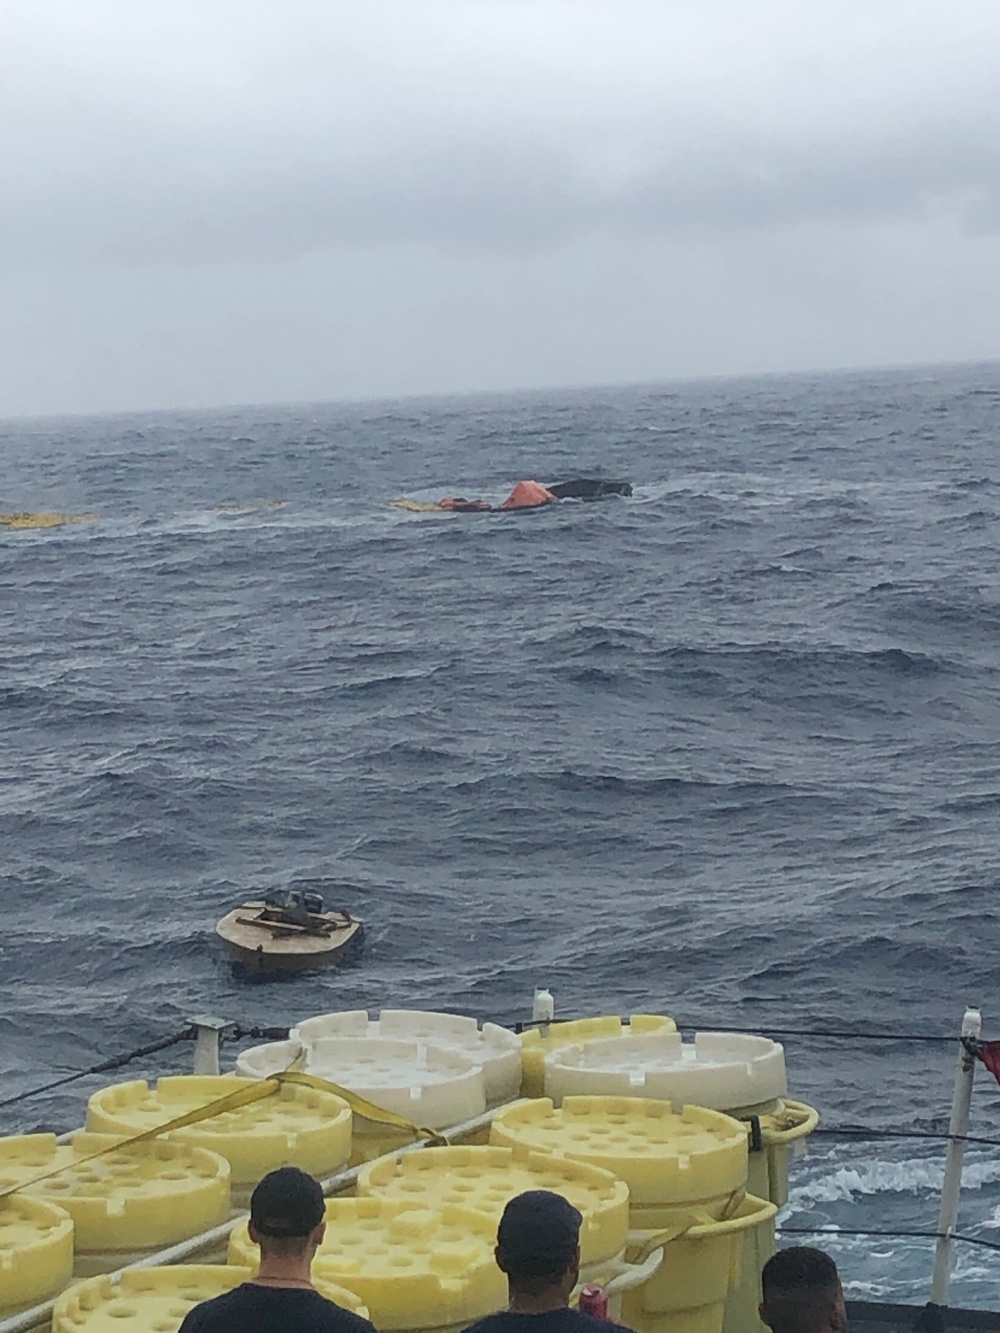 Coast Guard rescues 37 after fishing boat capsizes in Eastern Pacific Ocean